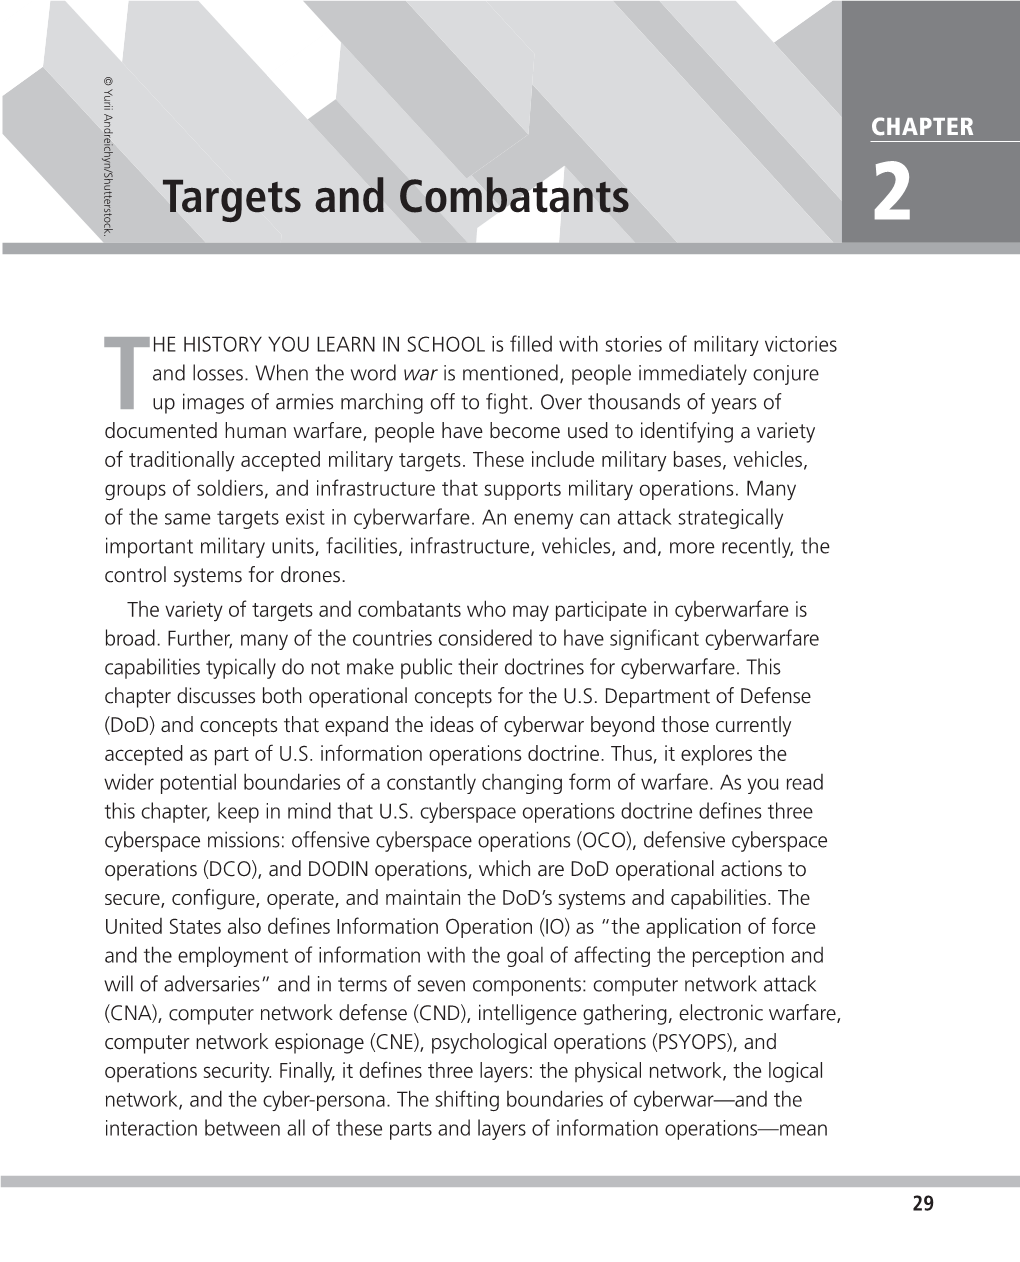 Targets and Combatants 2